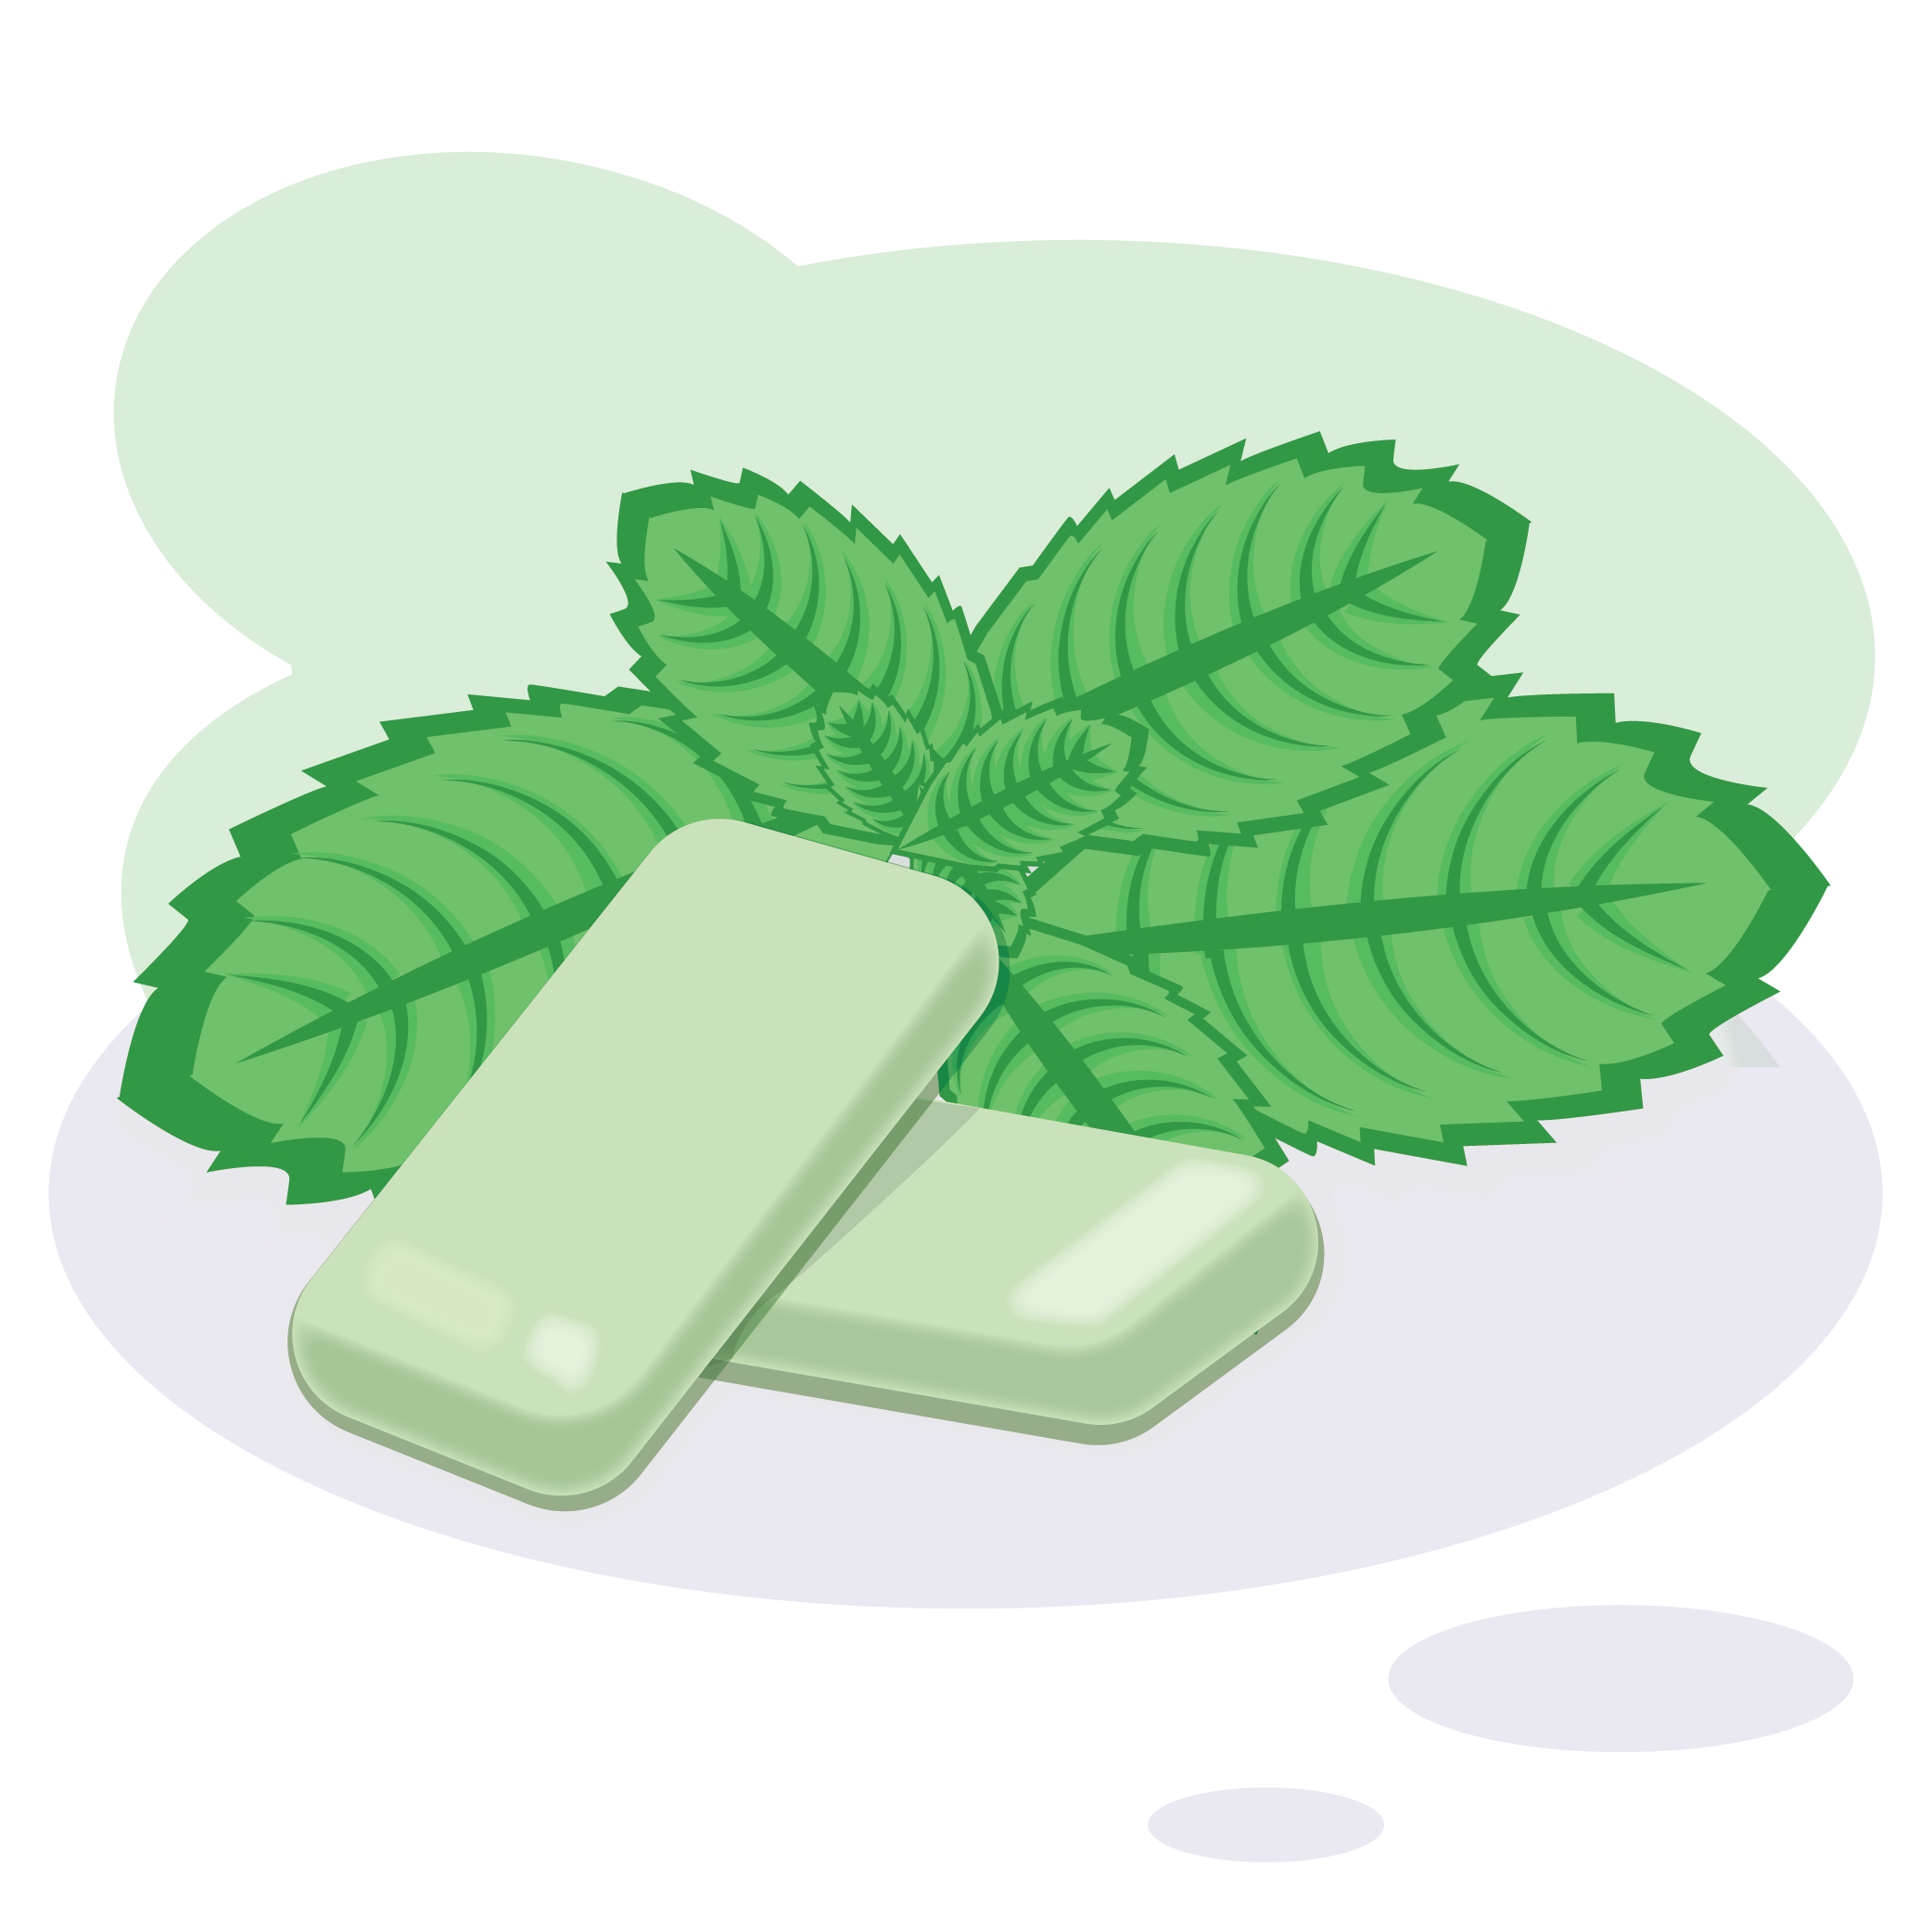 An illustration of two green sticks of gum stacked on top of and crossing one another. Mint leaves behind the gum to indicate the minty taste